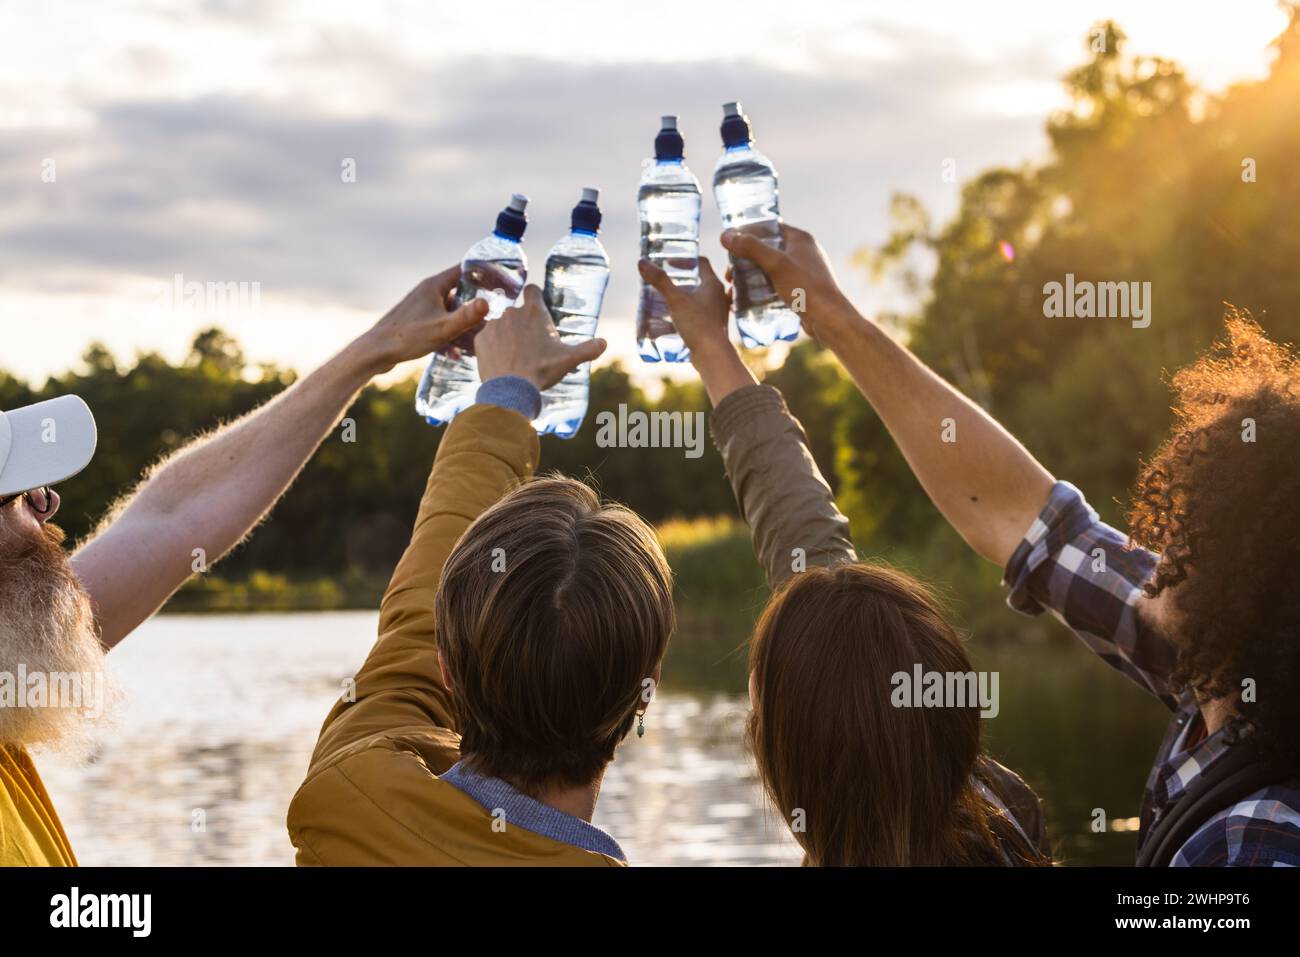 Four friends cheering with water bottles standing on the beach of a forest lake during beautiful sunset and celebrating life, re Stock Photo